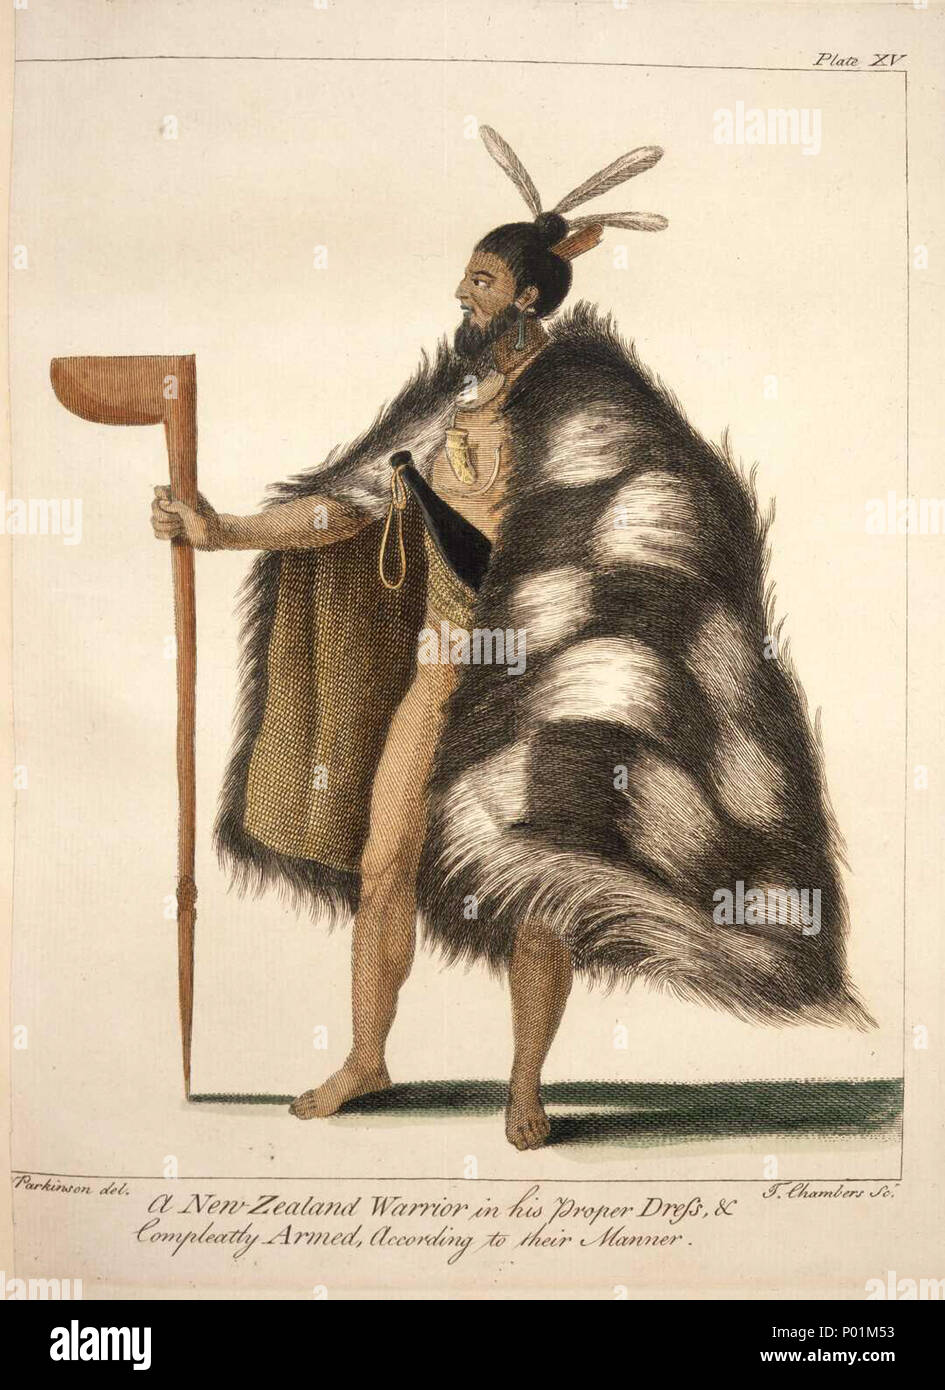 . Parkinson, Sydney, 1745-1771 :A New Zealand warrior in his proper dress & compleatly armed according to their manner. Parkinson del. T. Chambers sc. [London, 1784] Reference Number: PUBL-0037-15 A standing portrait of a Maori man, holding a tewhatewha in his outstretched left hand. He has a topknot hairstyle, and feathers in his hair, a fine dogskin cloak in a chequered pattern, a patu tucked into his belt and bone ornaments at his neck. Key terms: 1 image, categorised under Engravings and Portraits, related to Thomas Chambers, Sydney Parkinson, Men, Maori, Weapons, Maori, Maori - Clothing a Stock Photo